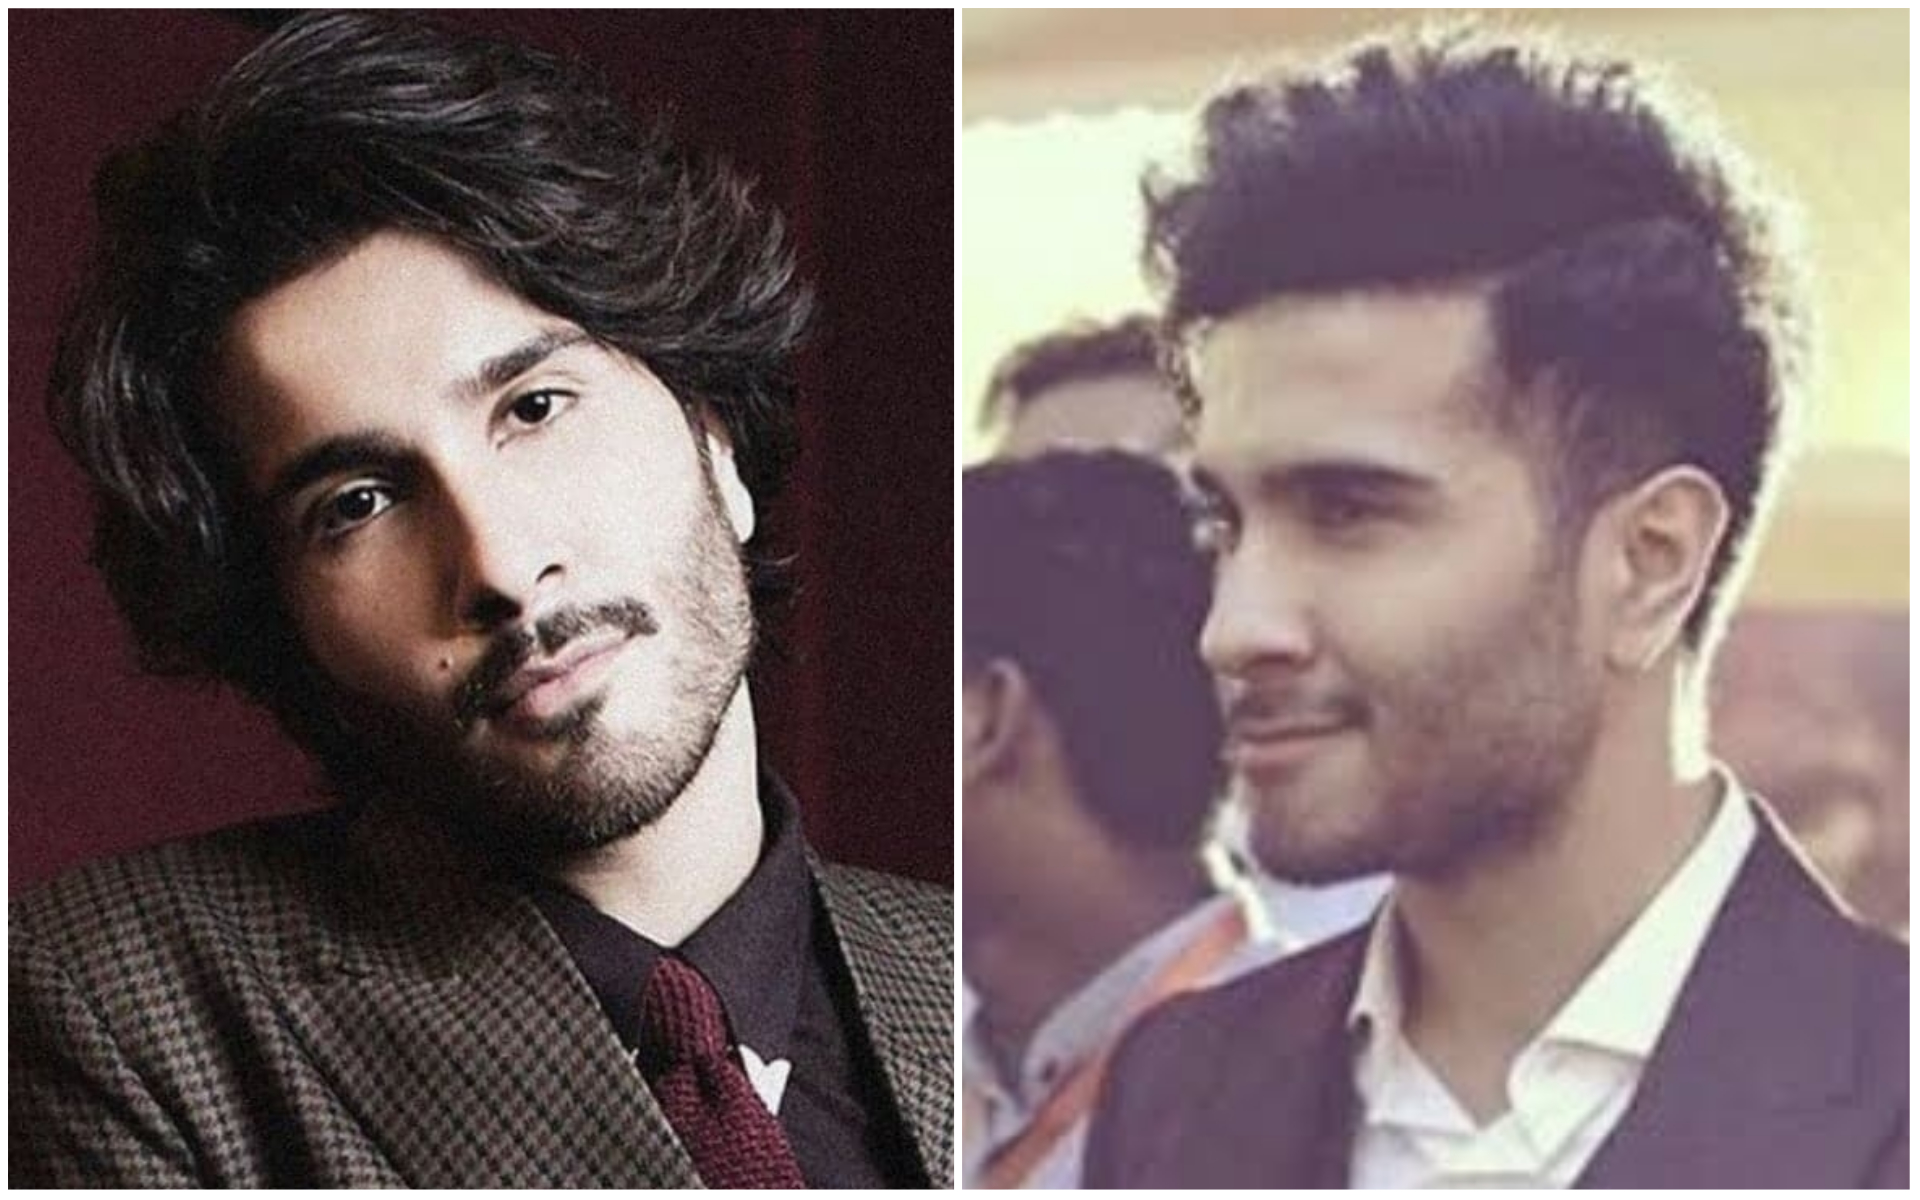 Long Hair VS Short Hair - Which Look Suits Pakistani Celebrities Better? |  